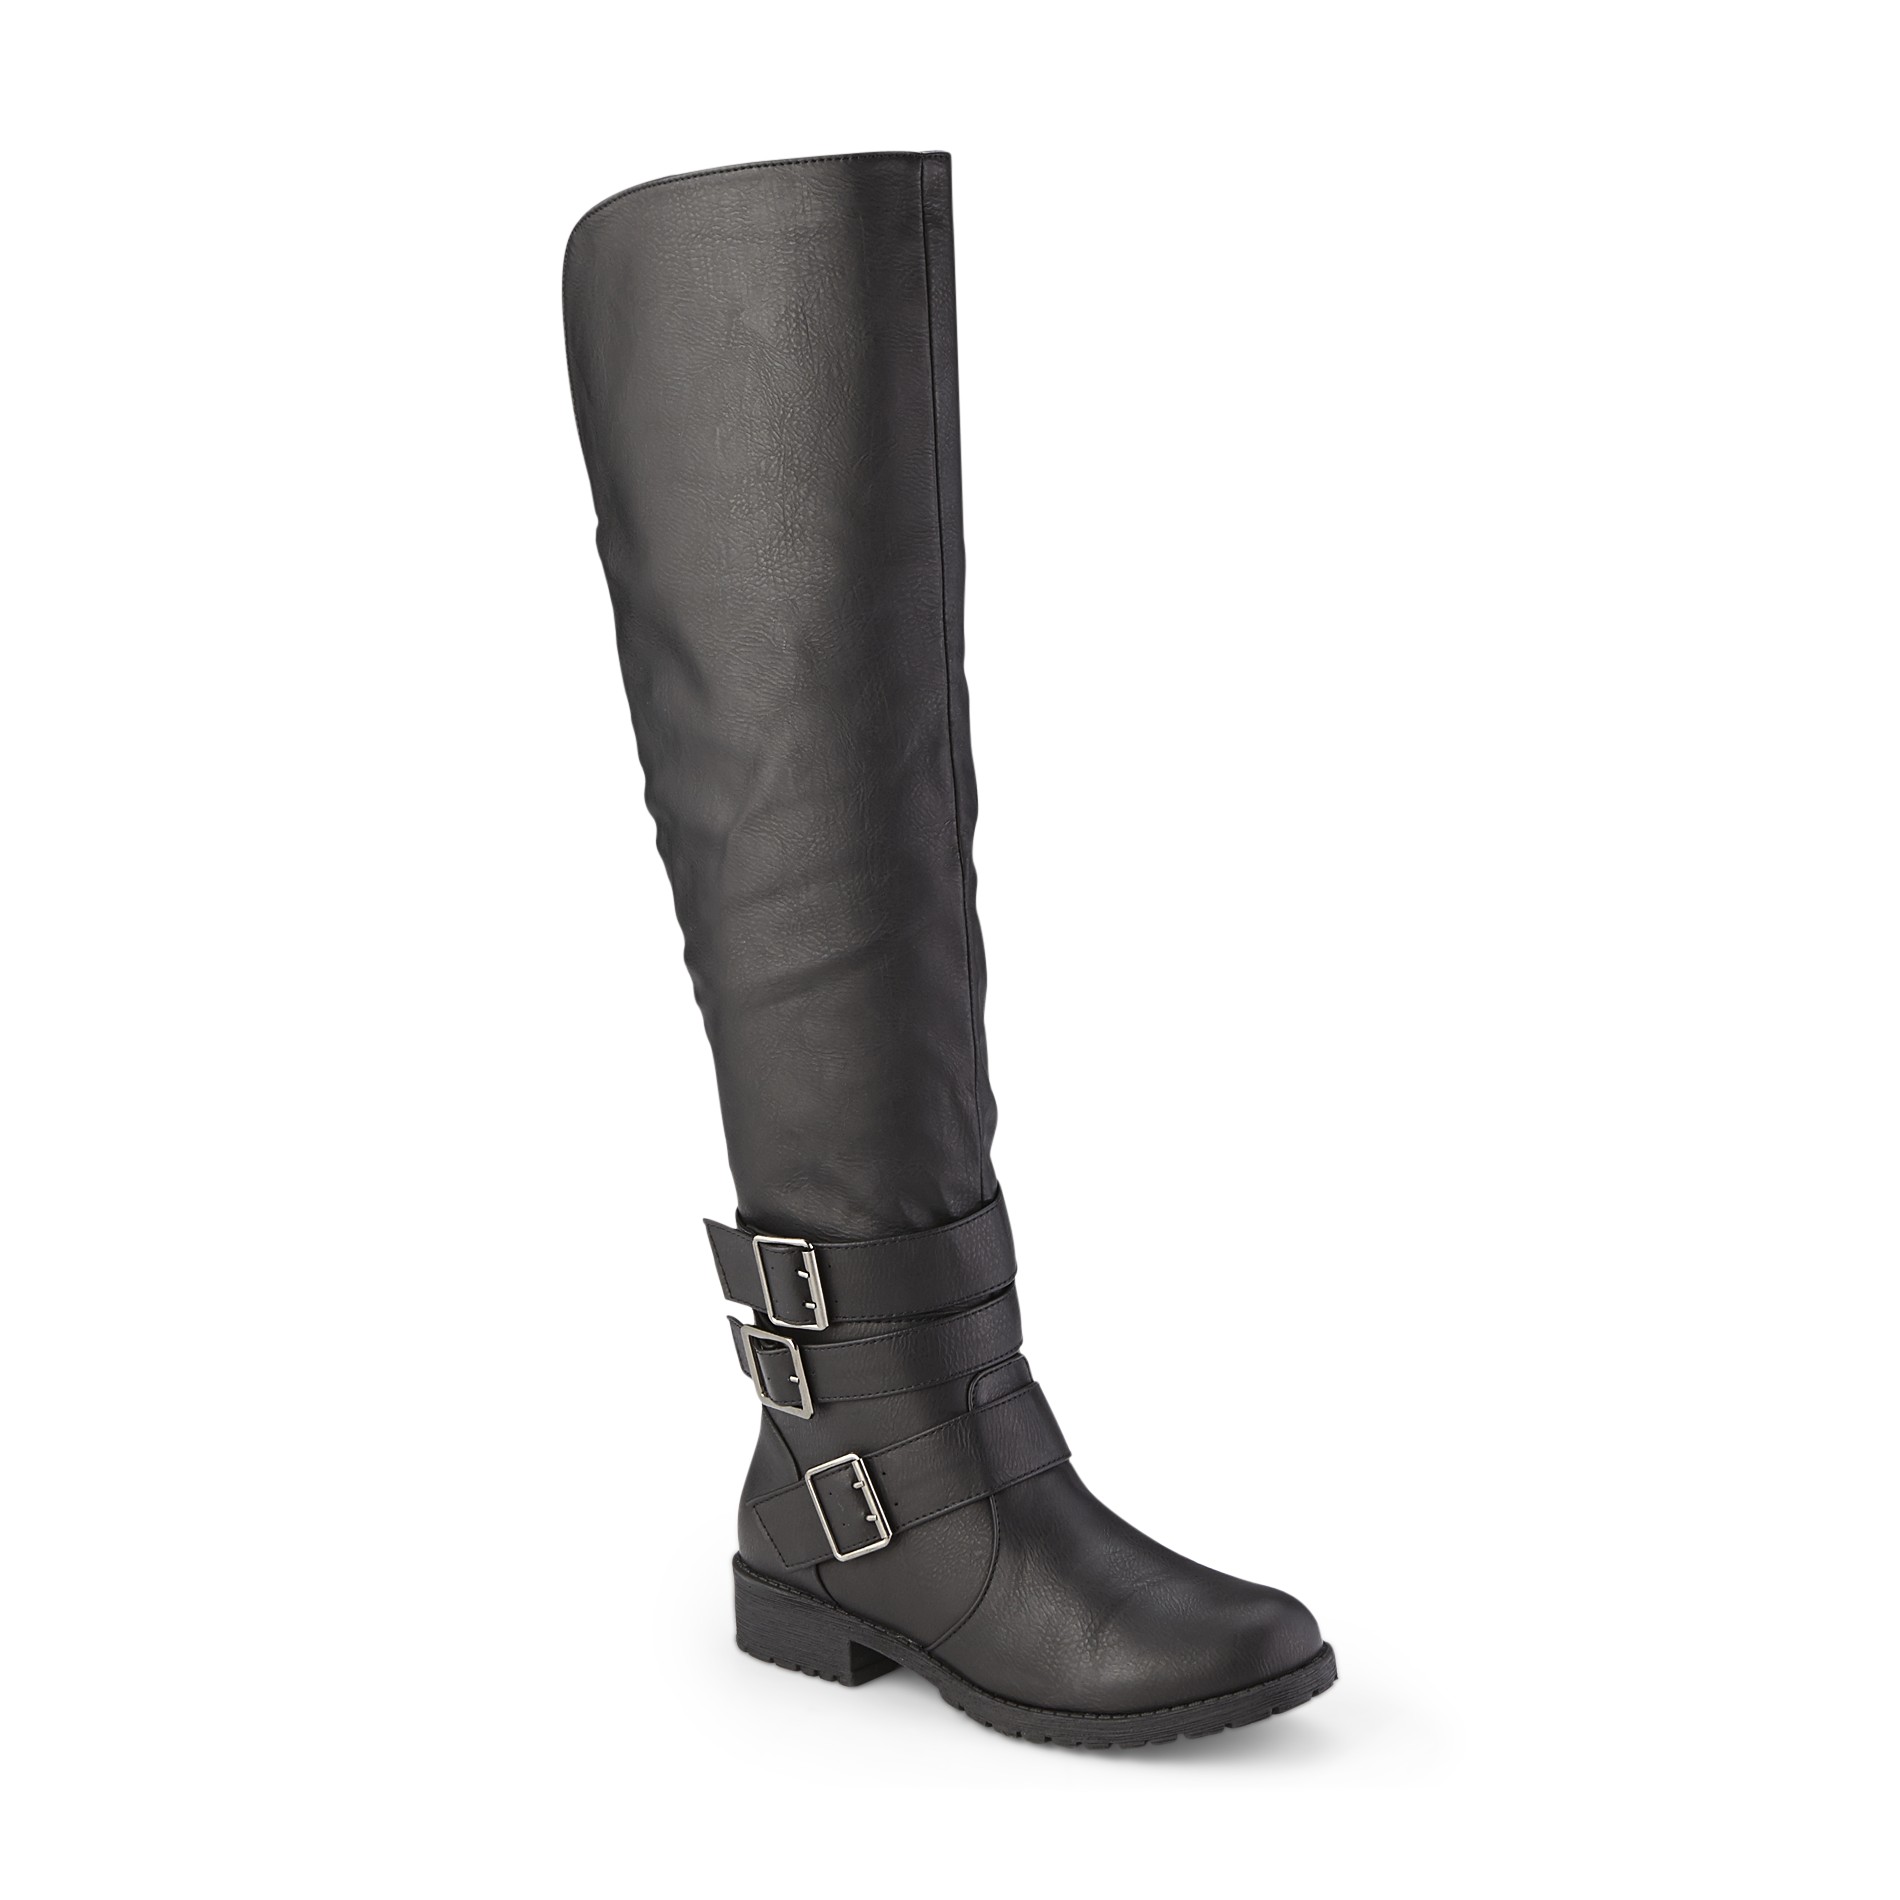 Olivia Miller Women's Madision 20" Black Tall Riding Boot